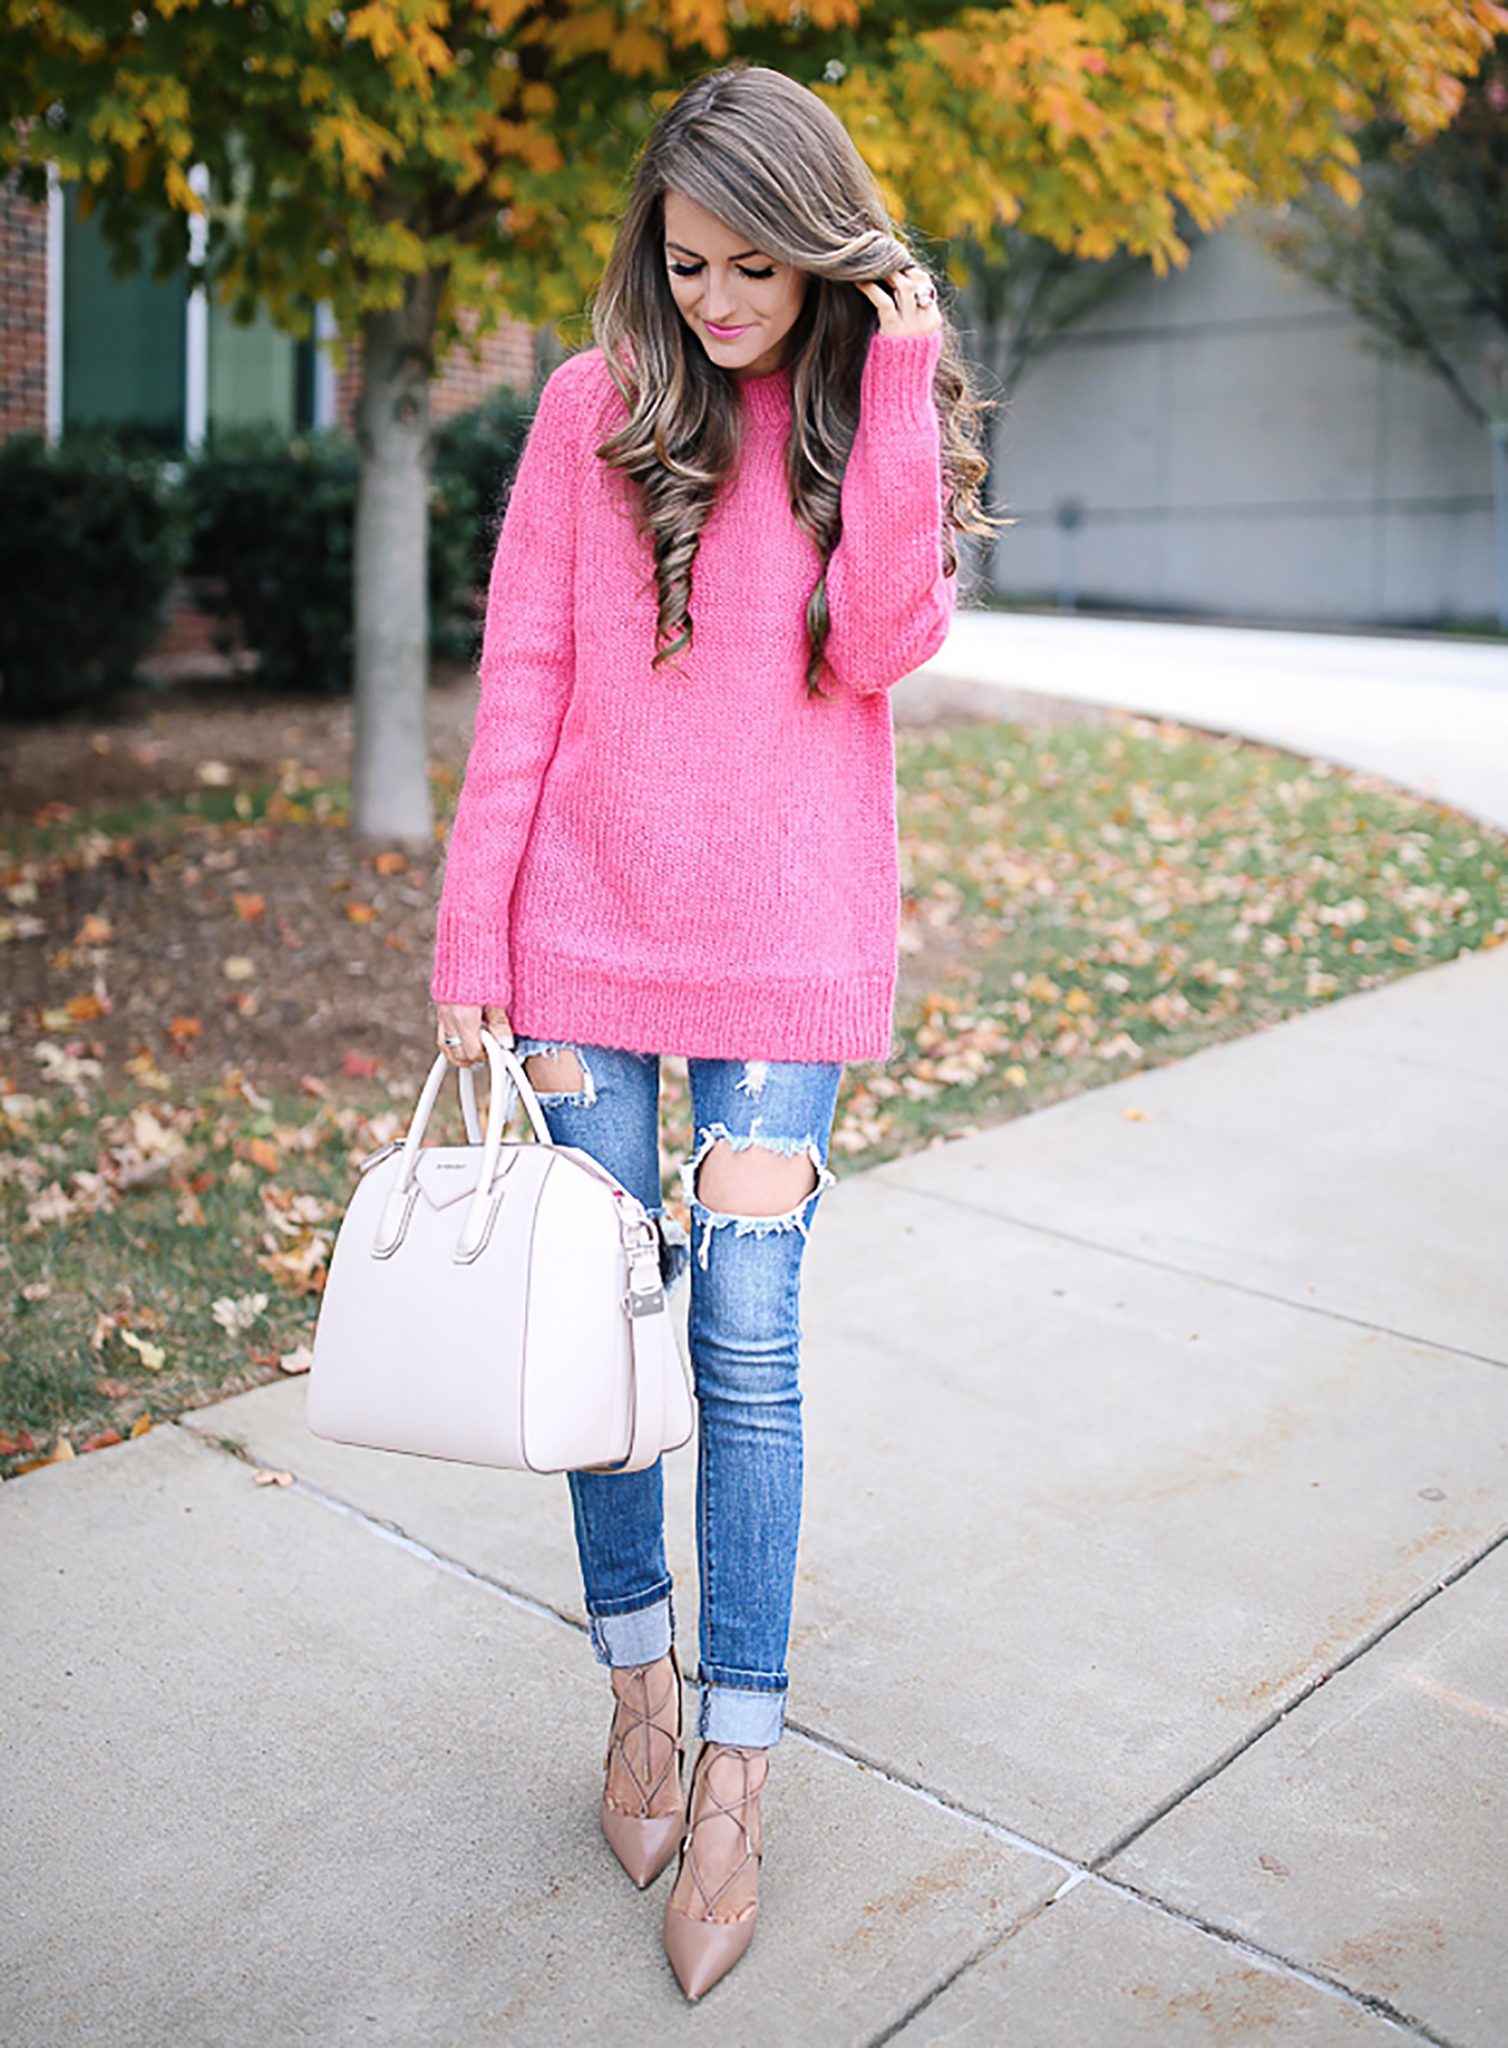 It's Time to Wear Pink - Pink Outfit Ideas for Women - Her Style Code